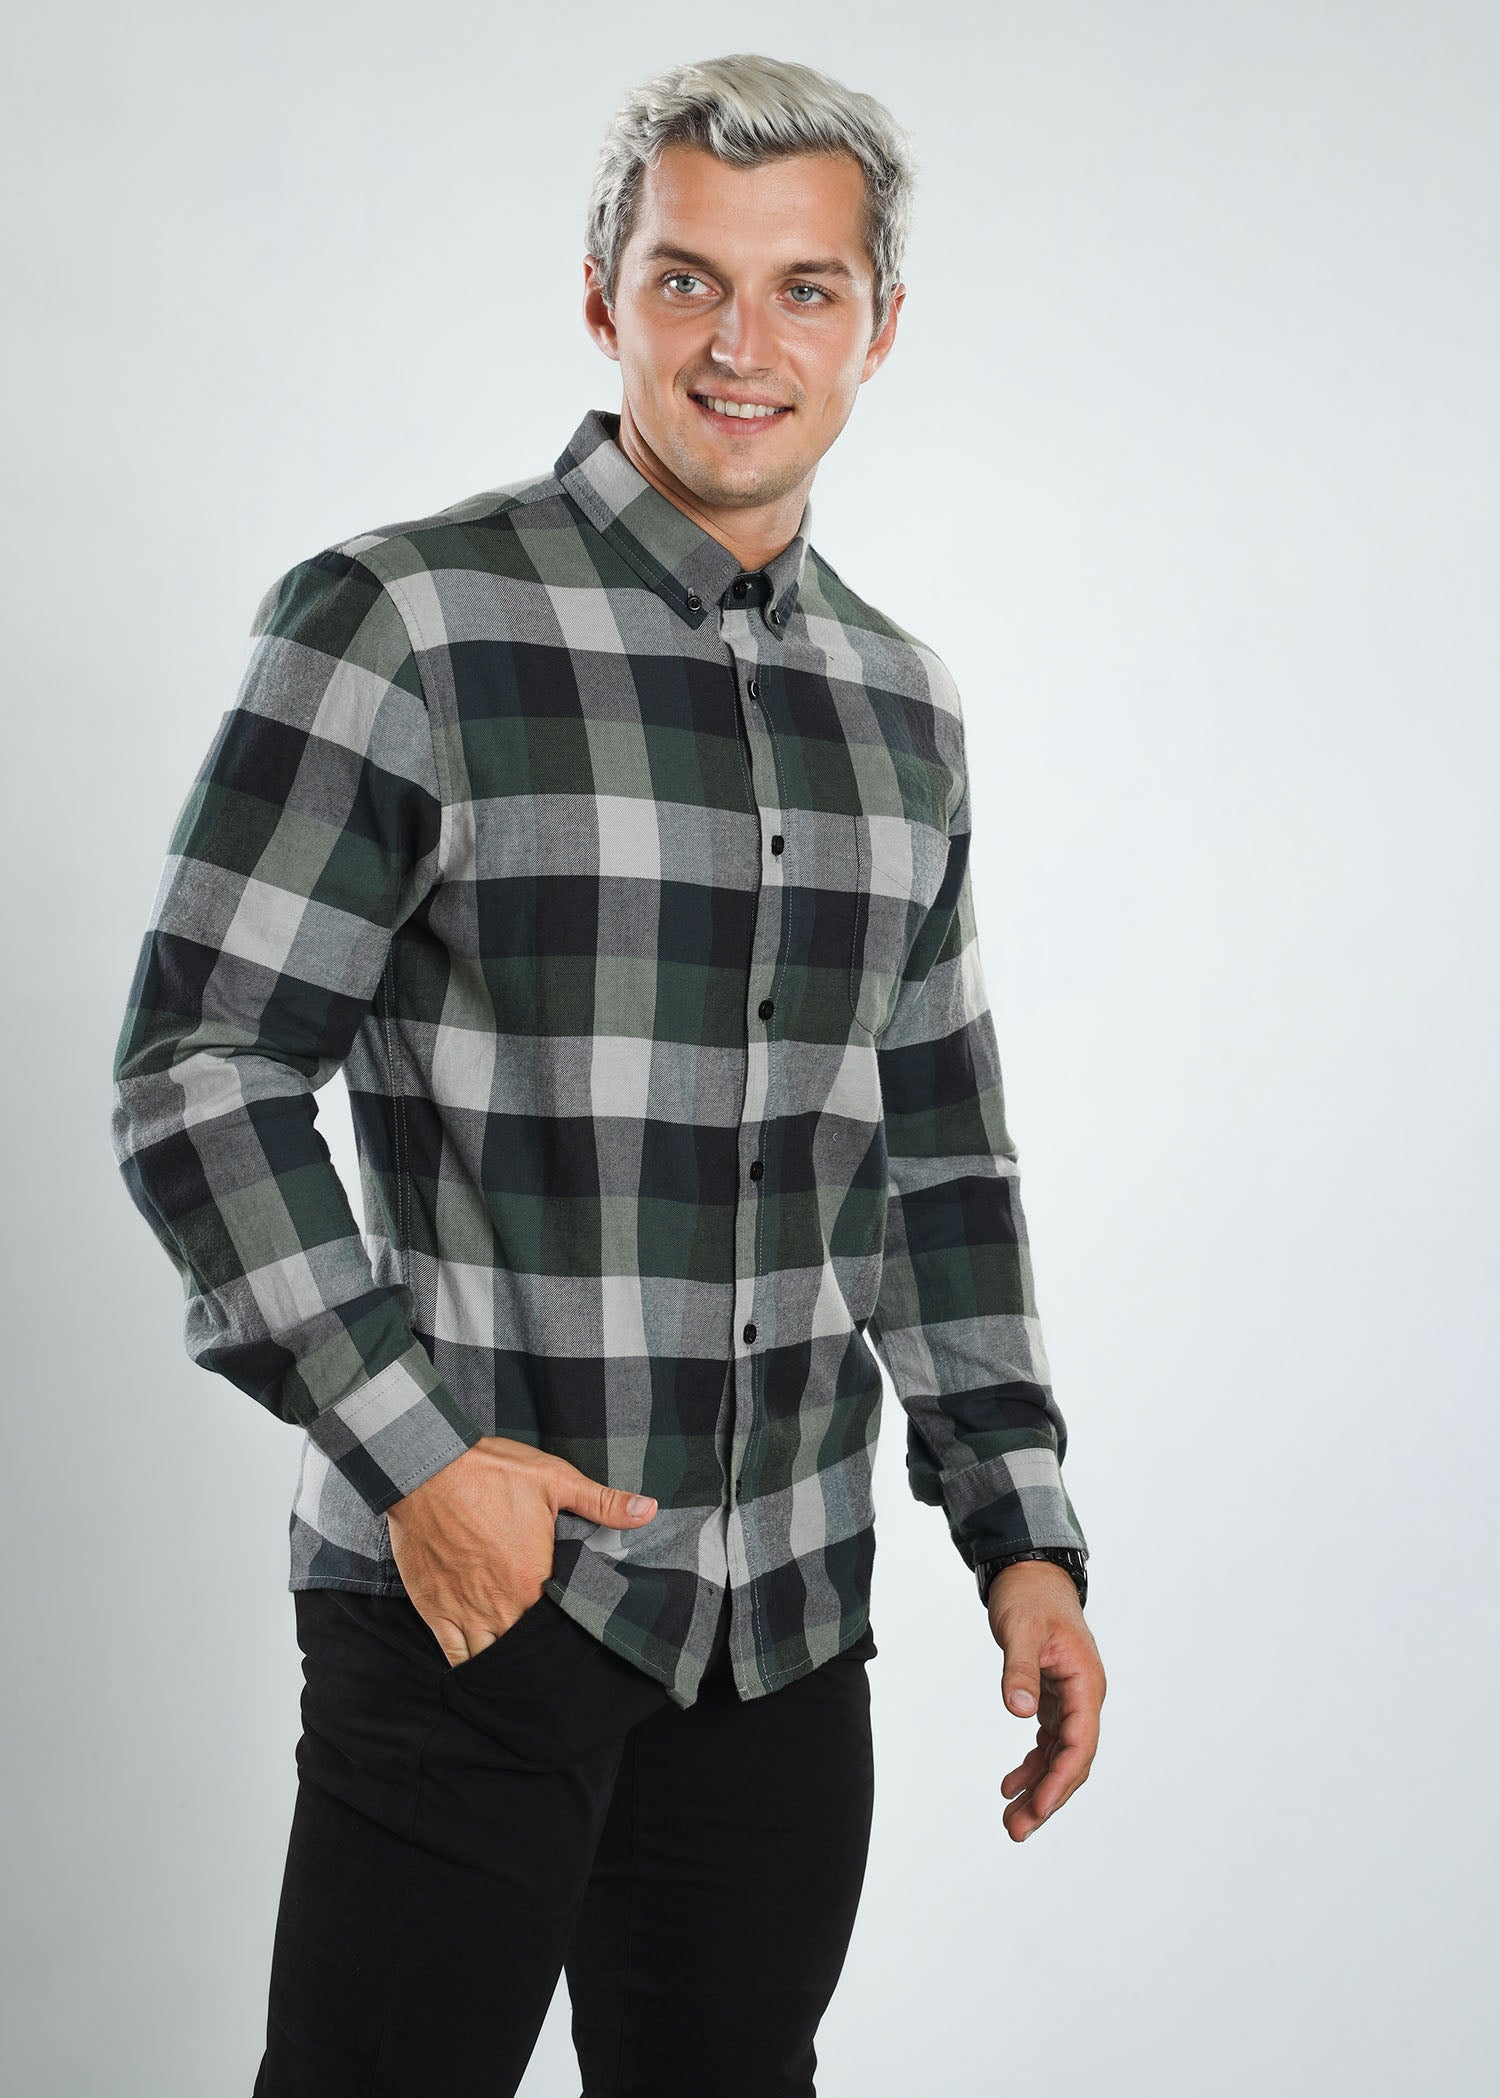 Discover the Best Mens Check shirts in Sri Lanka with Carlo Clothing"